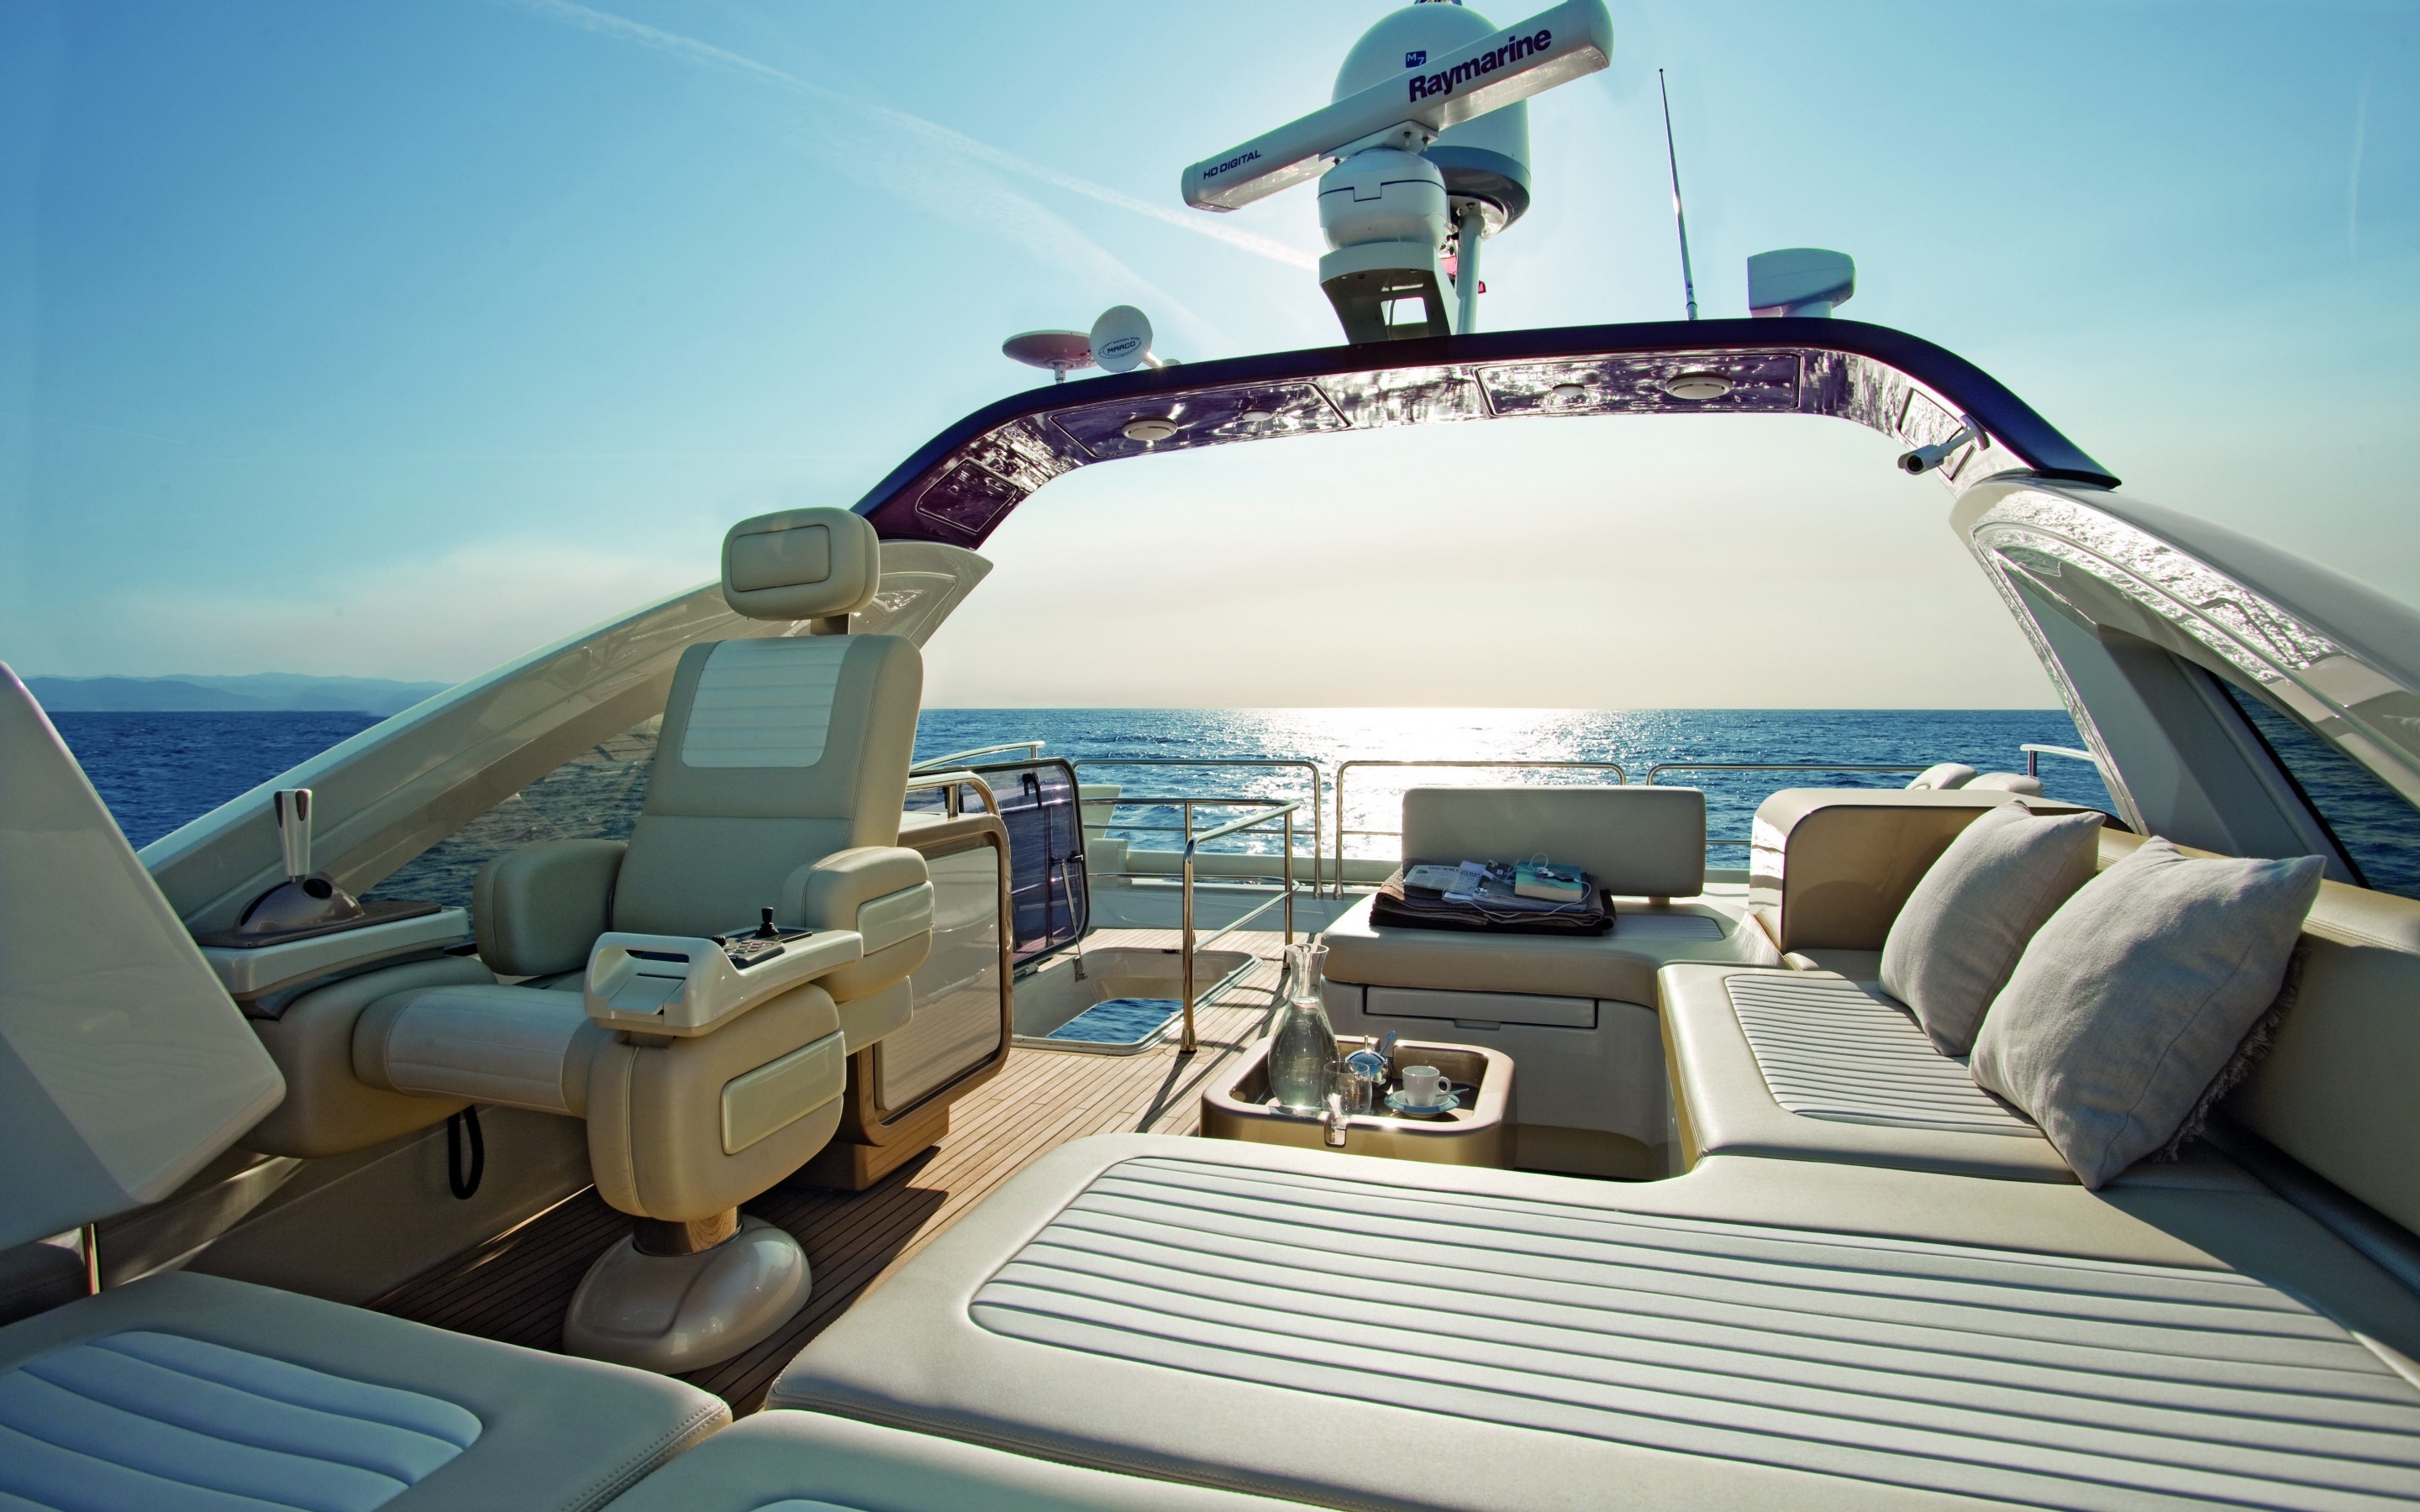 Lovely Luxury Yacht for 2880 x 1800 Retina Display resolution